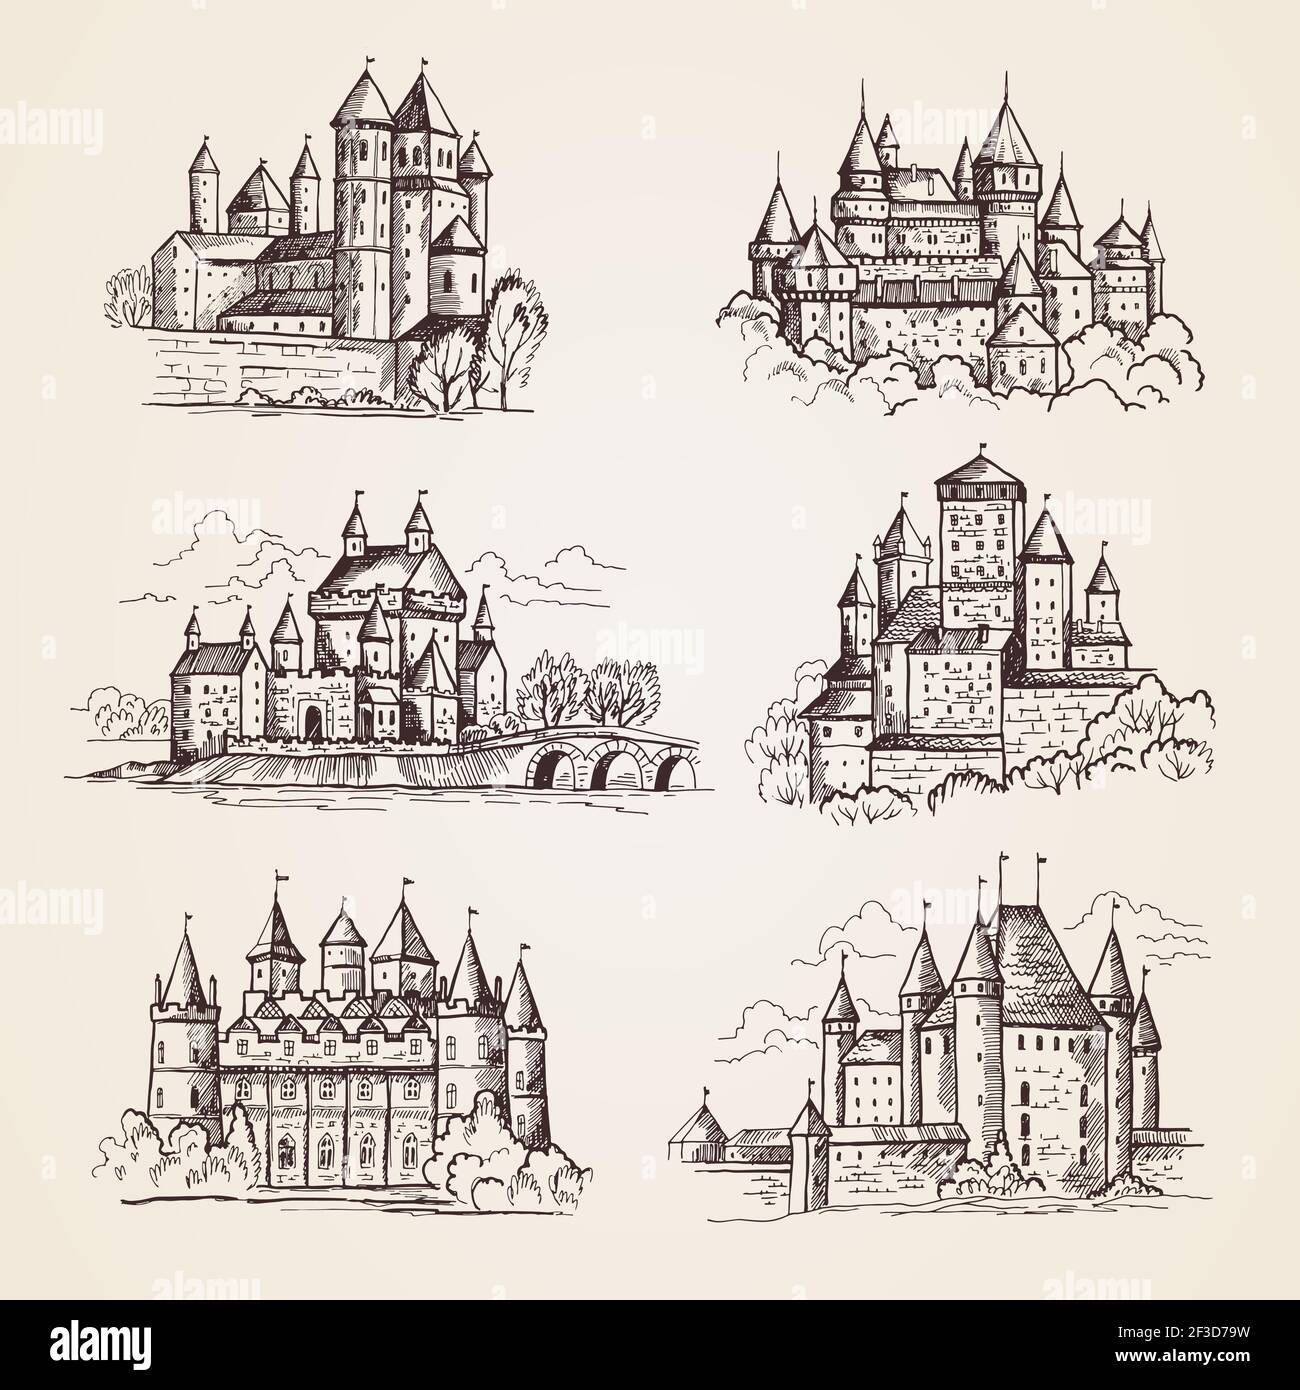 Drawing of Architectural Structures of the Medieval Fairy-tale